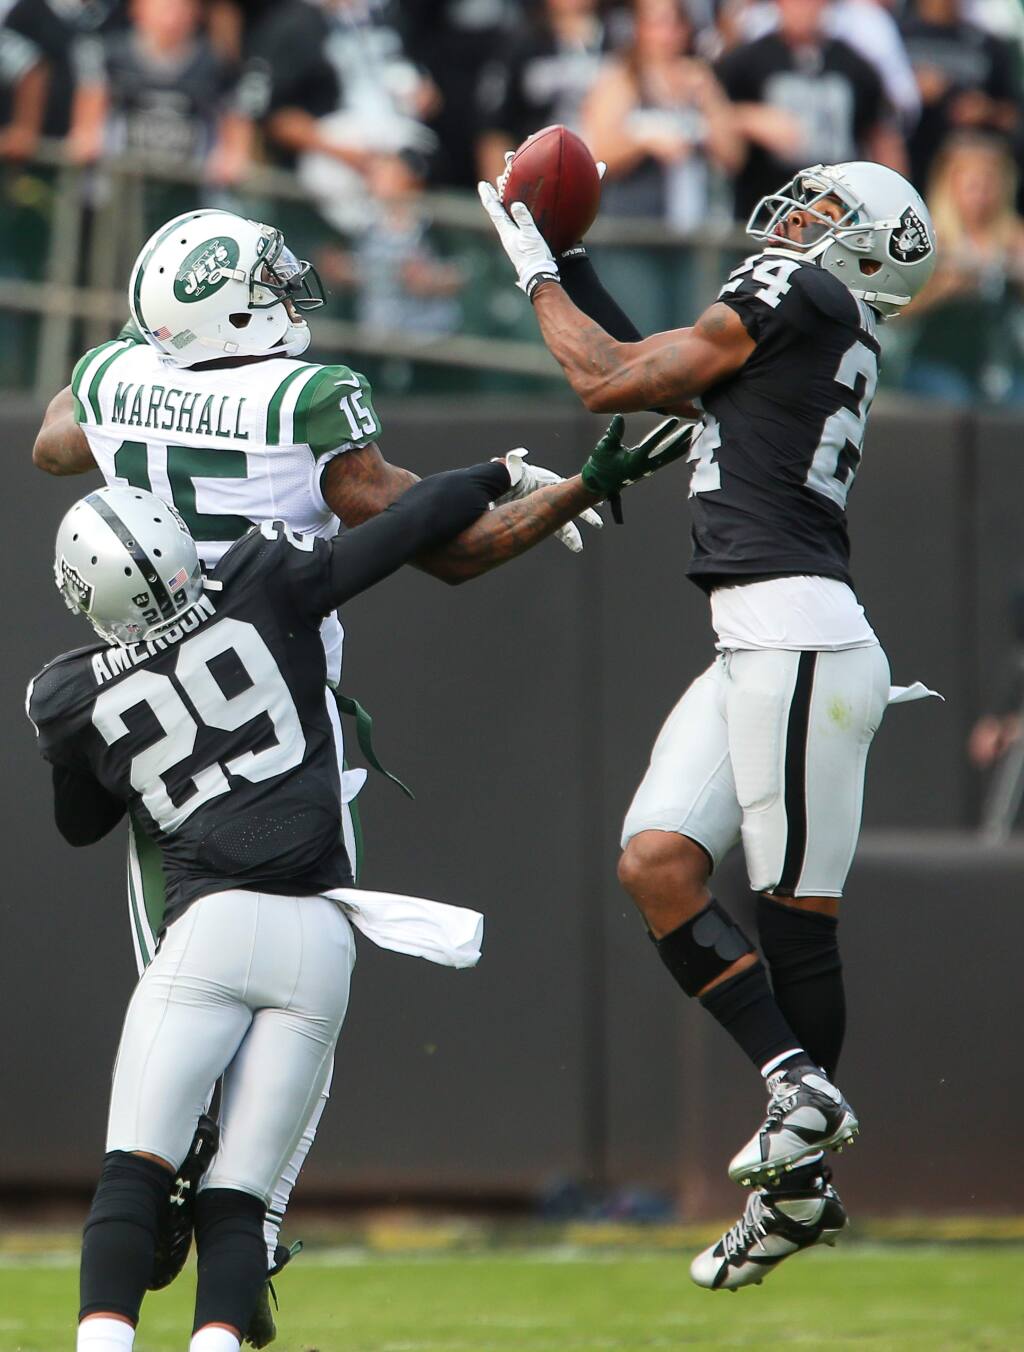 Charles Woodson is Raiders' best in secondary, even old and hurt